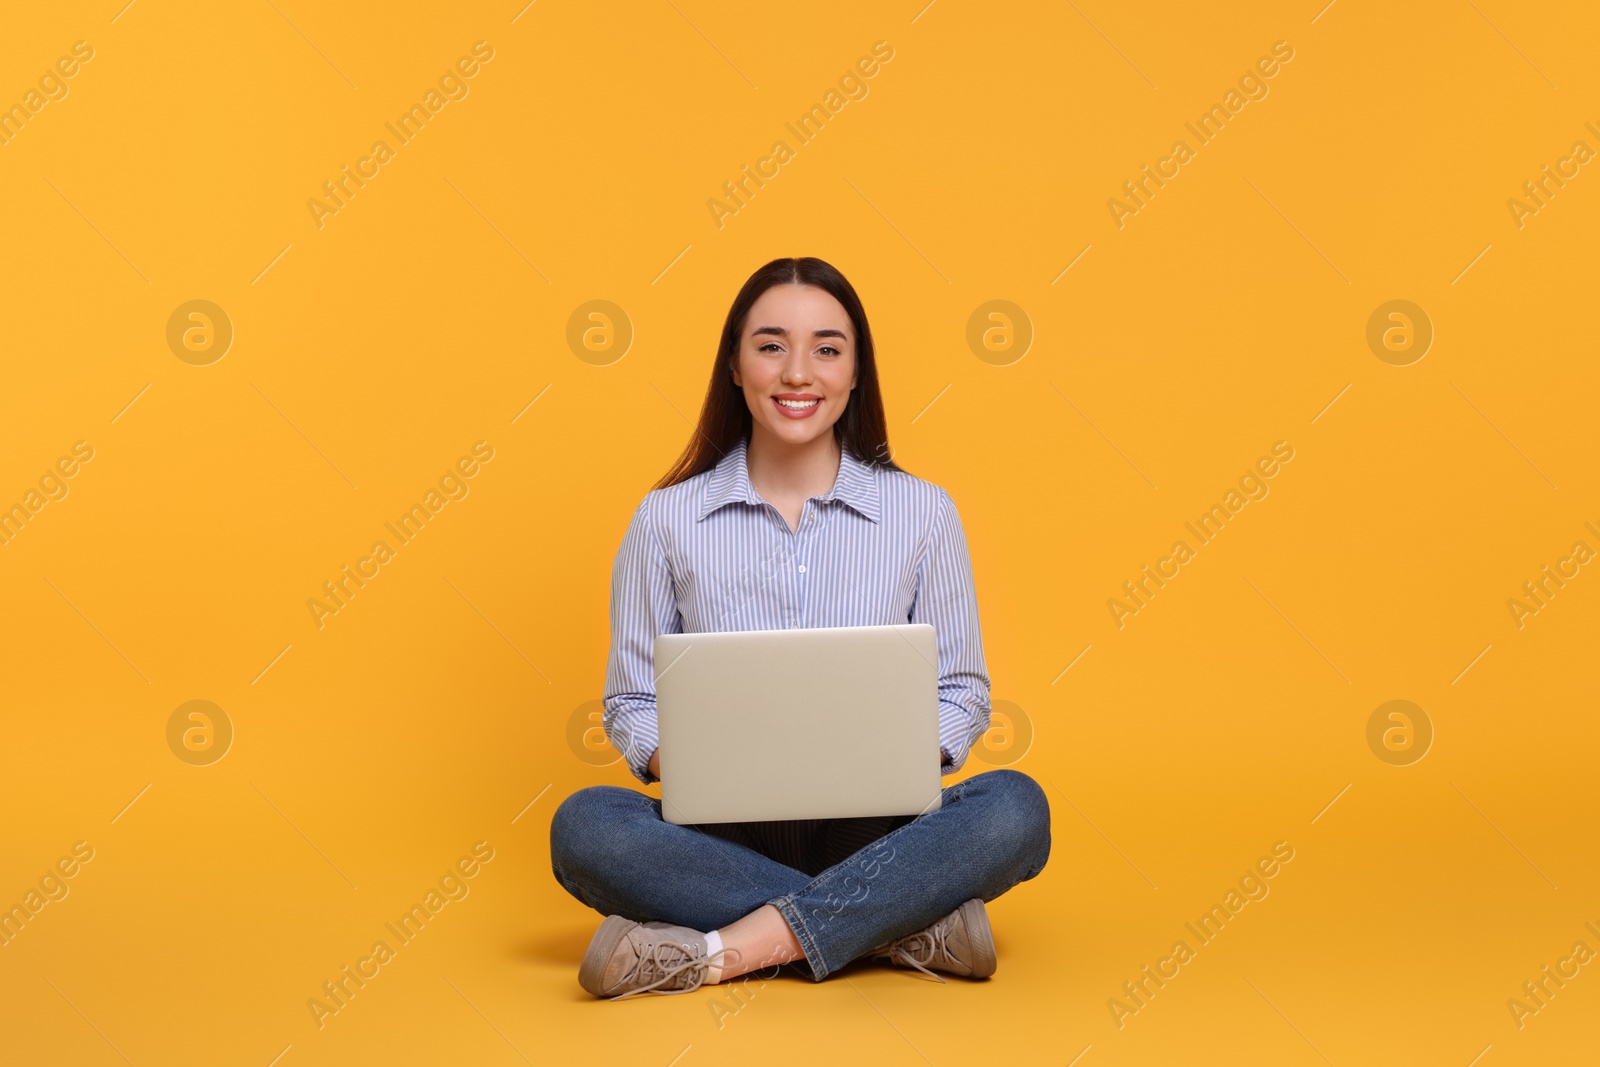 Photo of Smiling young woman working with laptop on yellow background